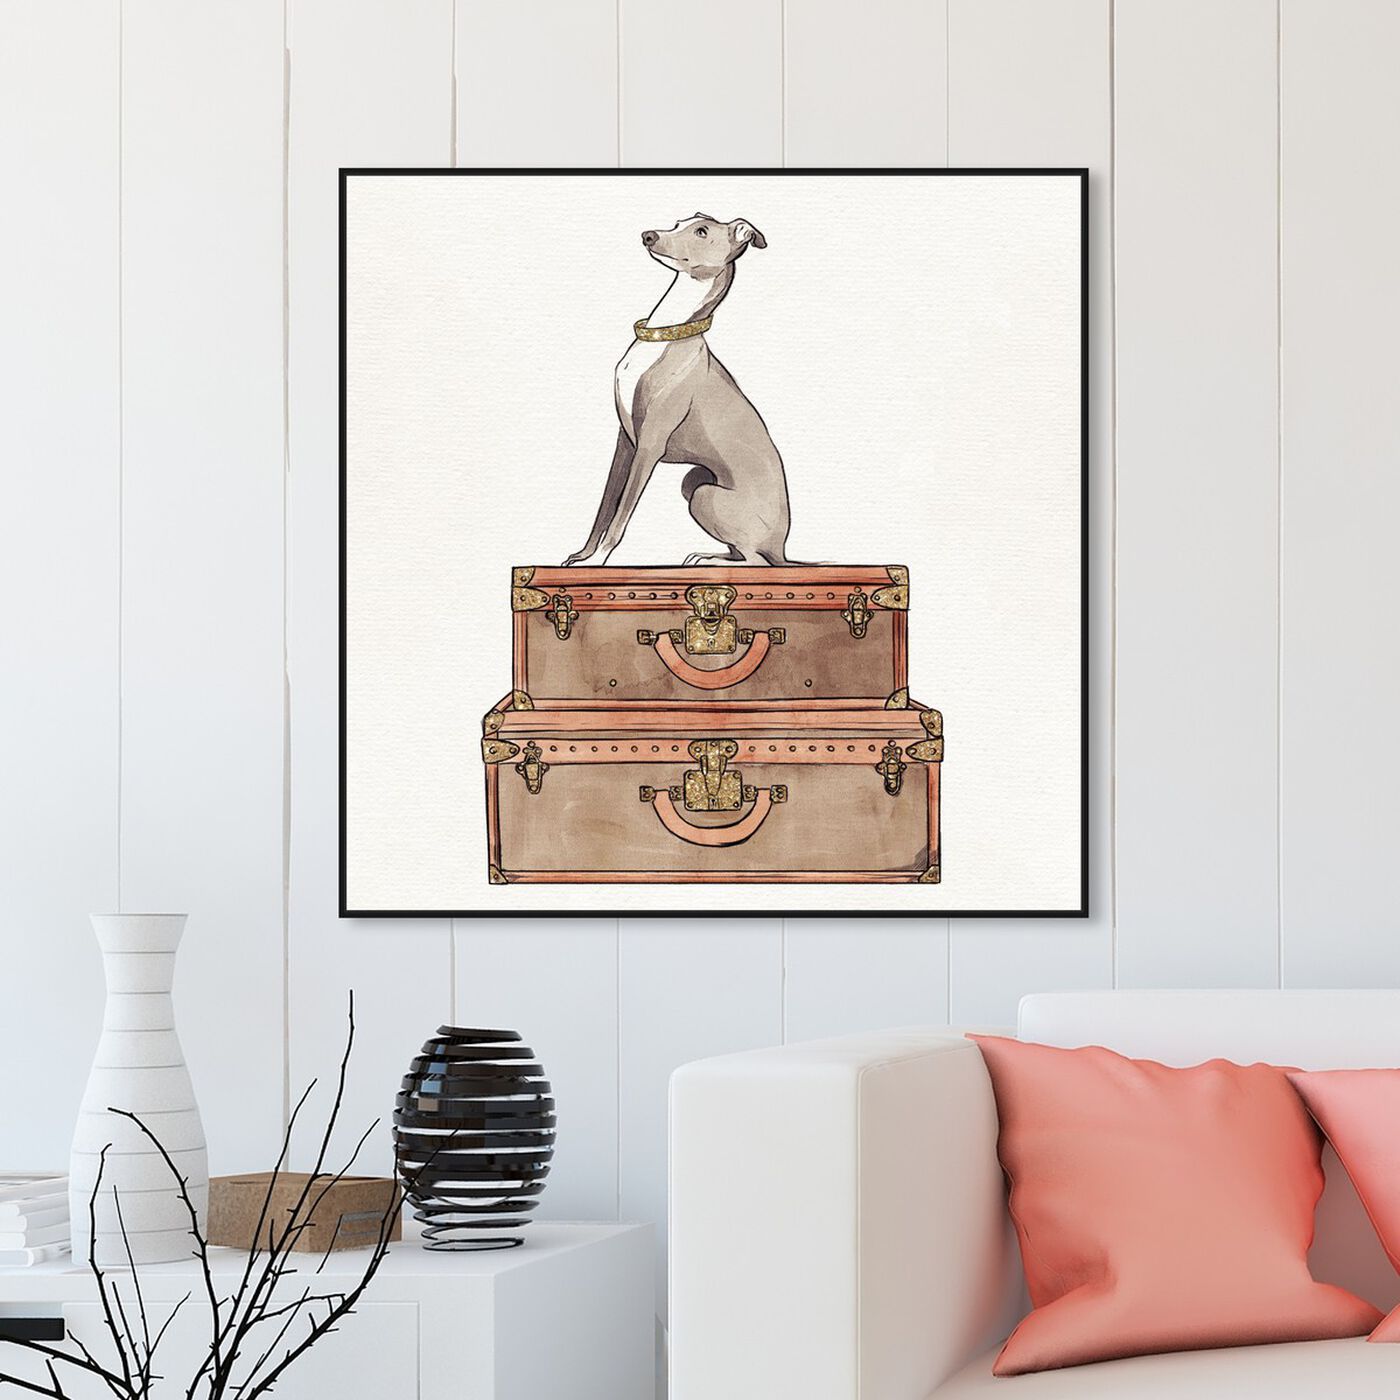 Oliver Gal 'Sleeping Pitbull Suitcase' Fashion and Glam Wall Art Canvas Print - Brown, Gray - 16 x 16